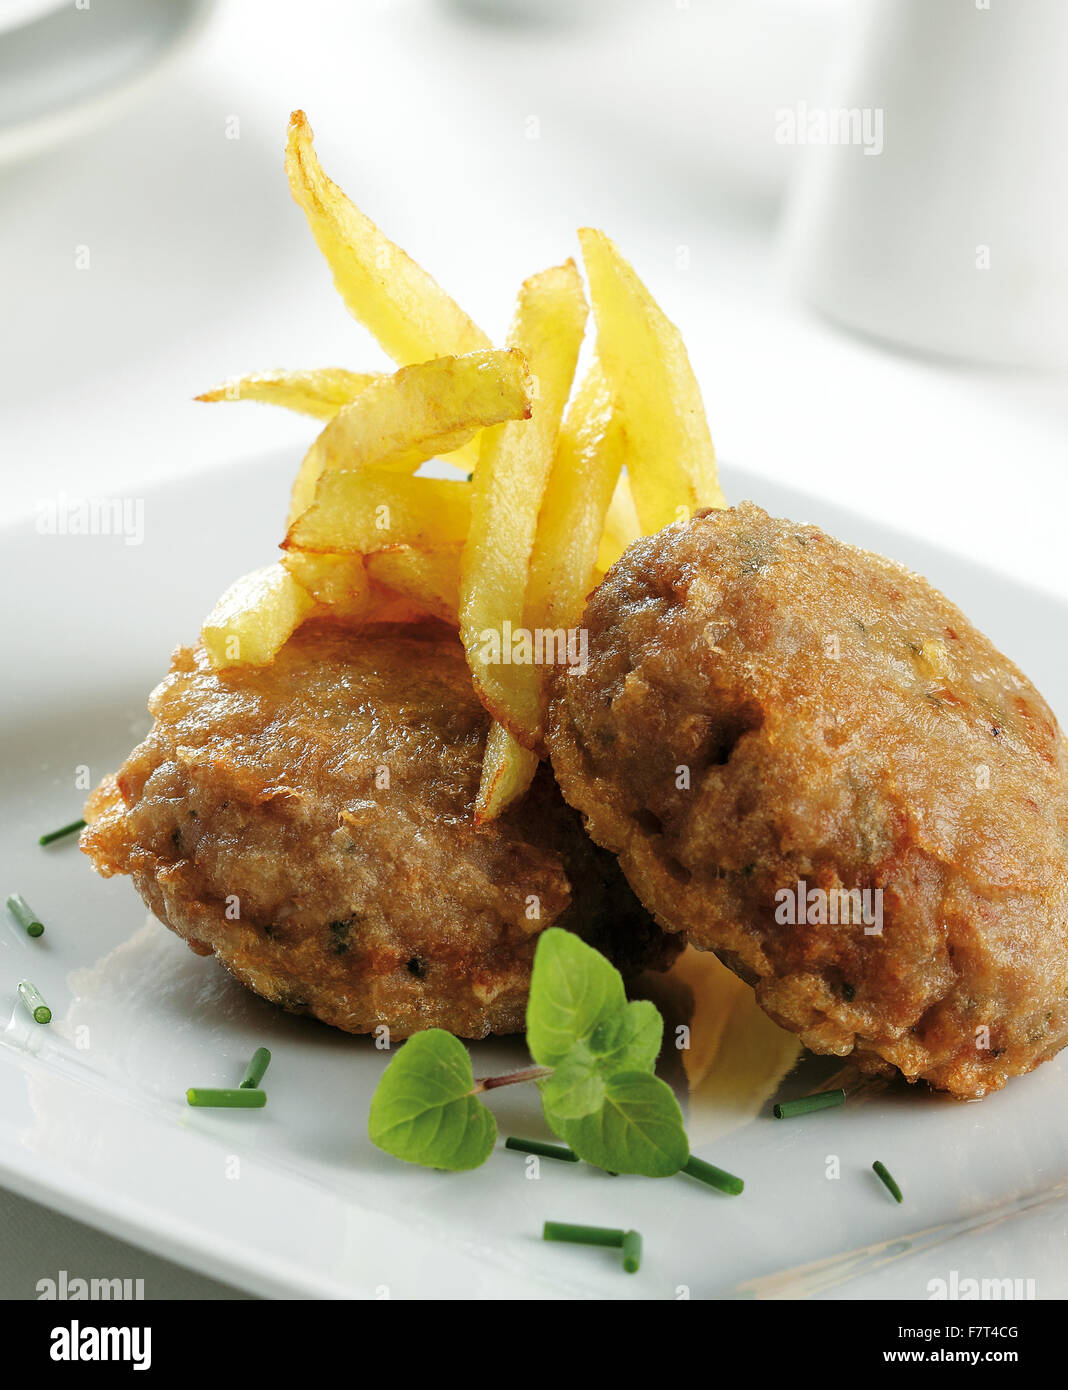 Delicious burgers fried in batter, served with french fried potatoes Stock Photo